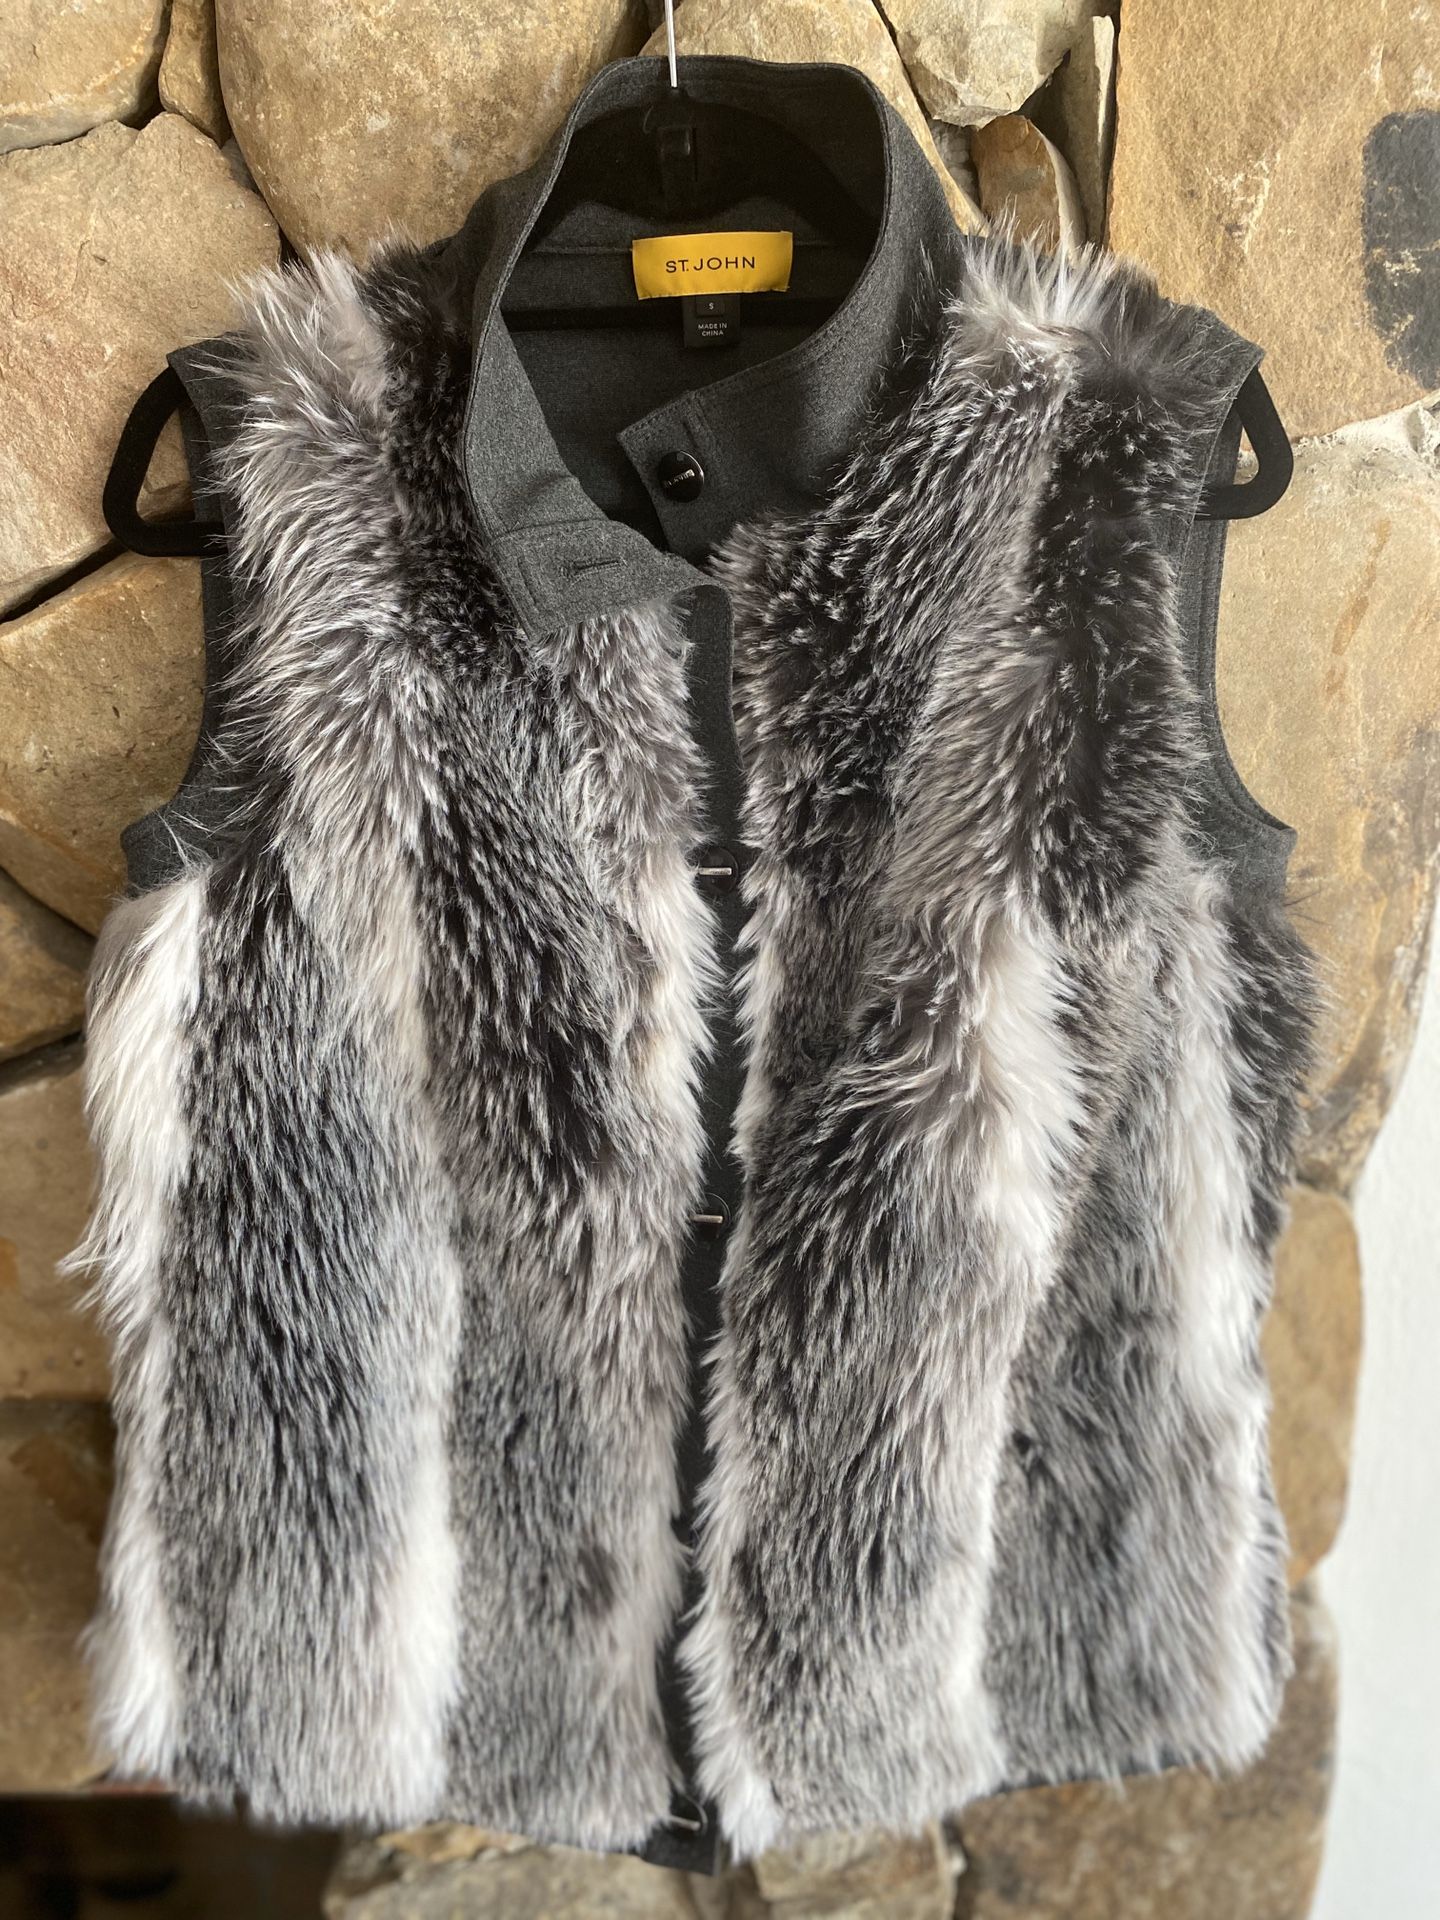 St. John!! Glamorous grey faux fur vest! Like new! Faux fur only in front. Small